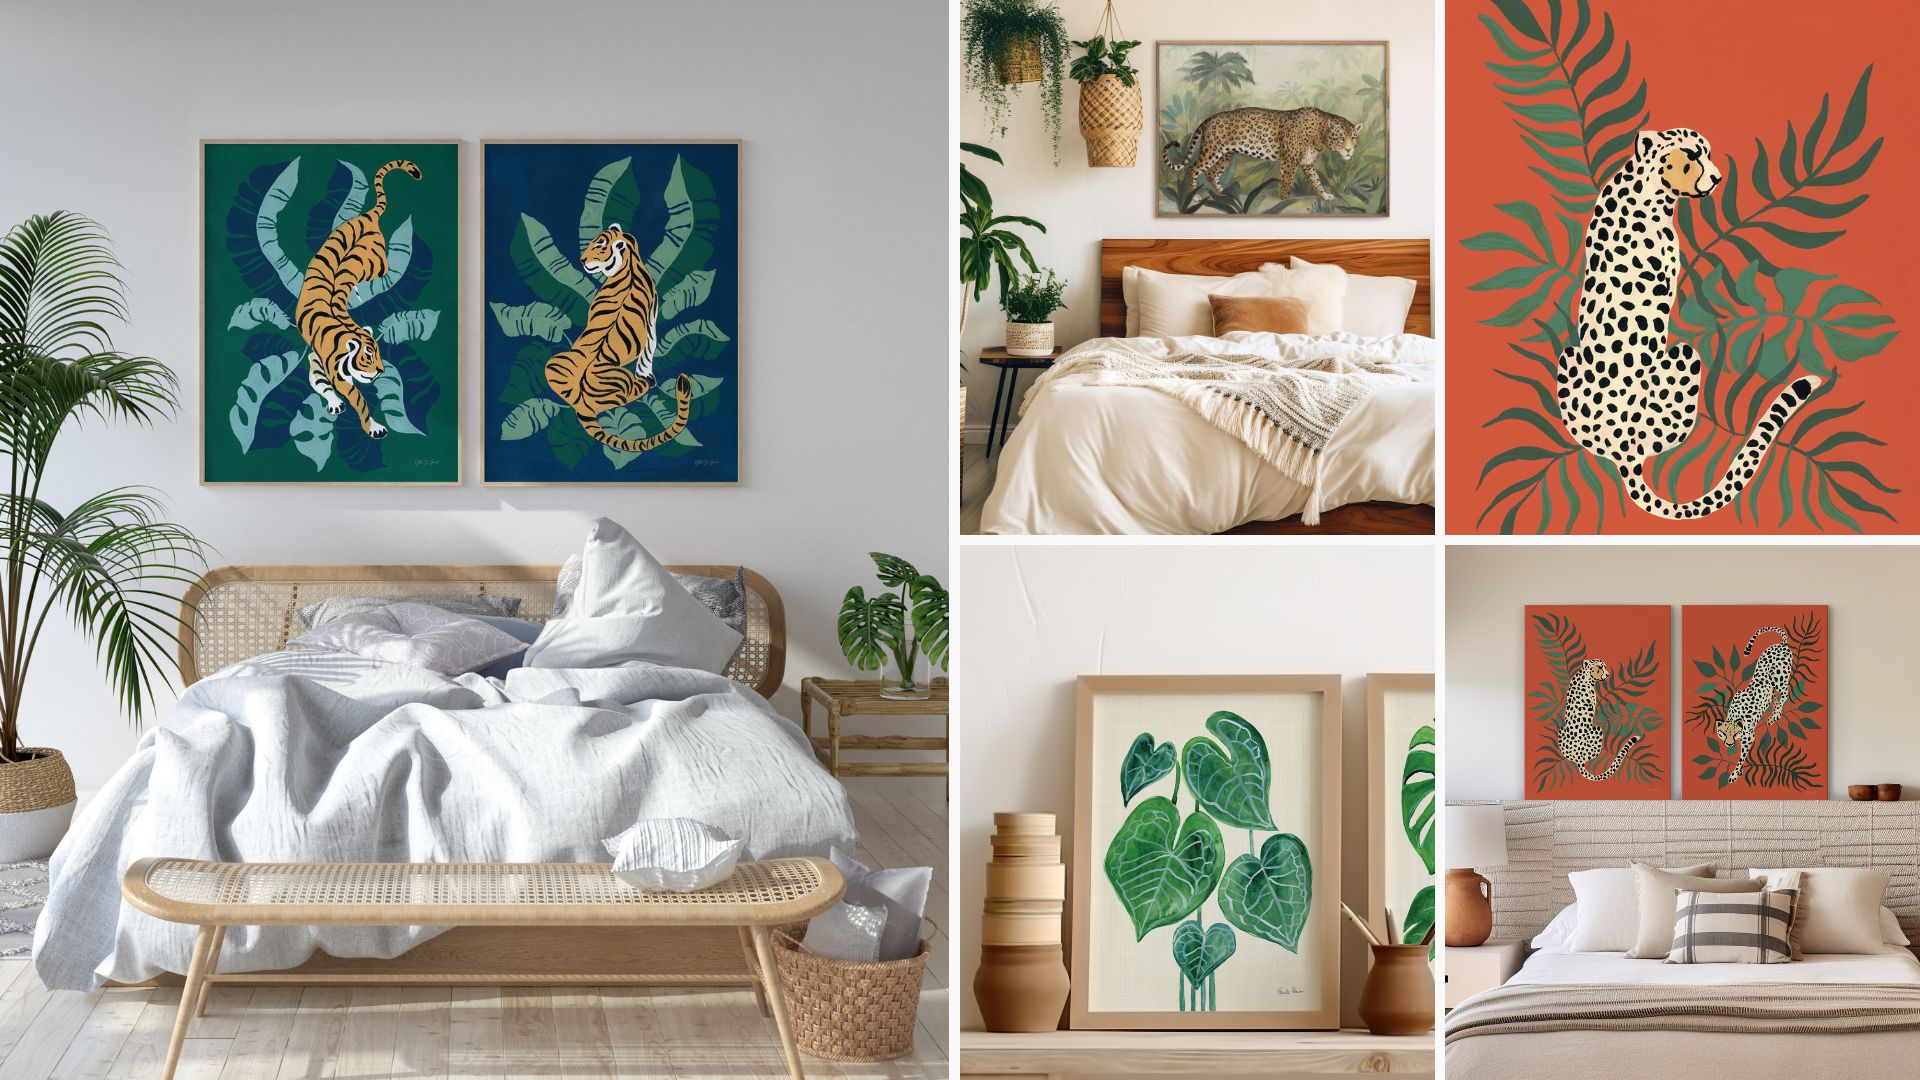 Tropical theme art for wall decor licensing
